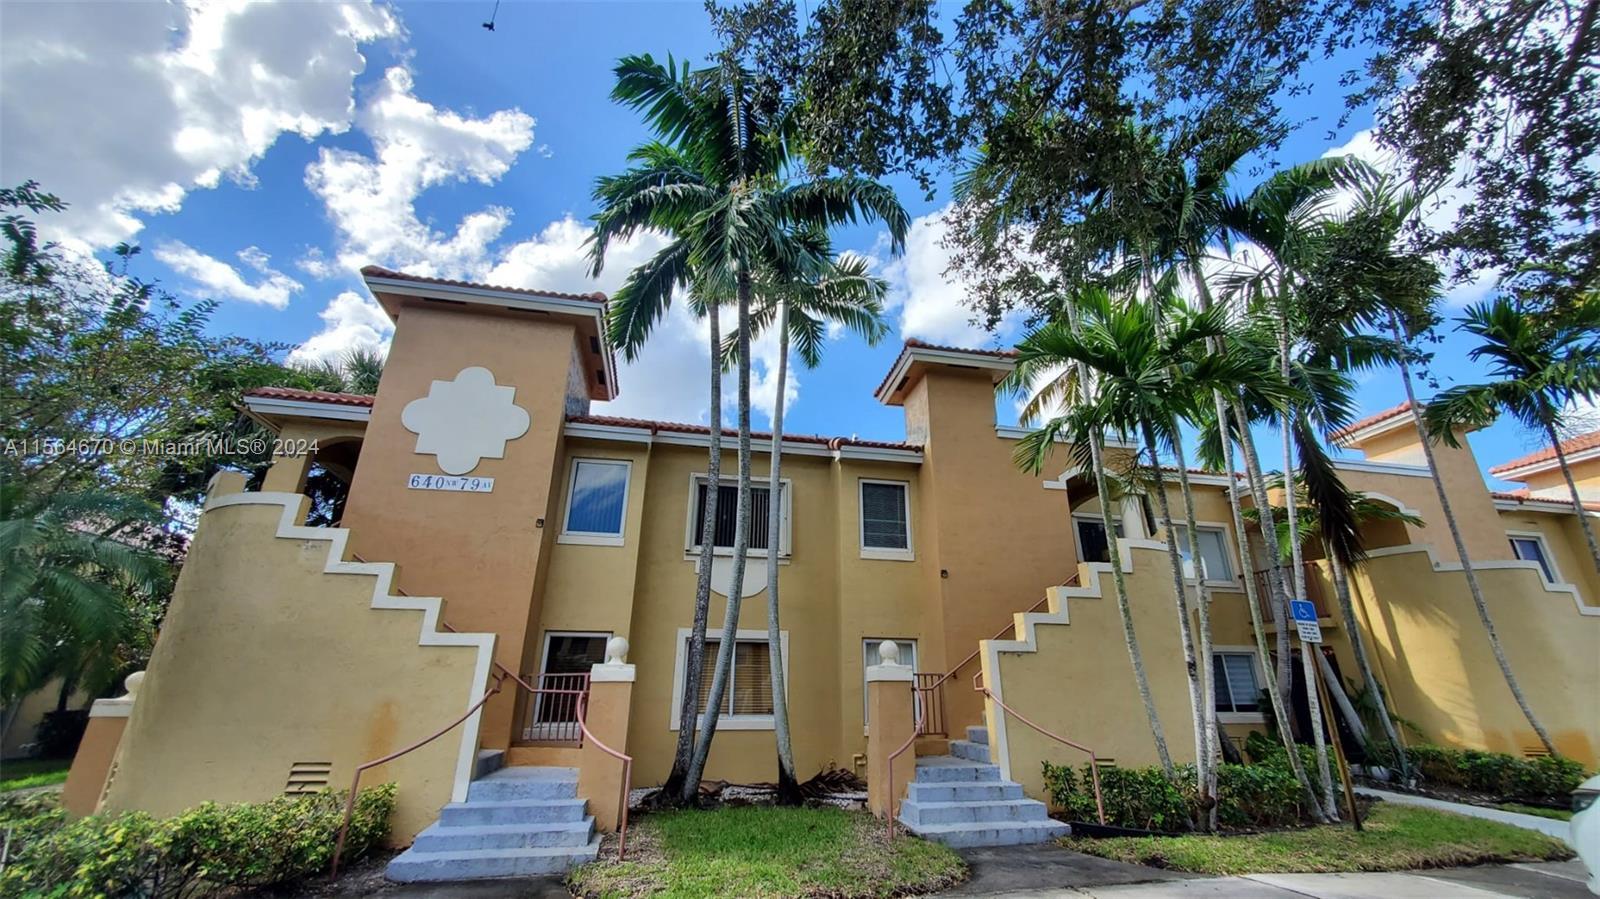 Photo of 640 NW 79th Ave #202 in Pembroke Pines, FL